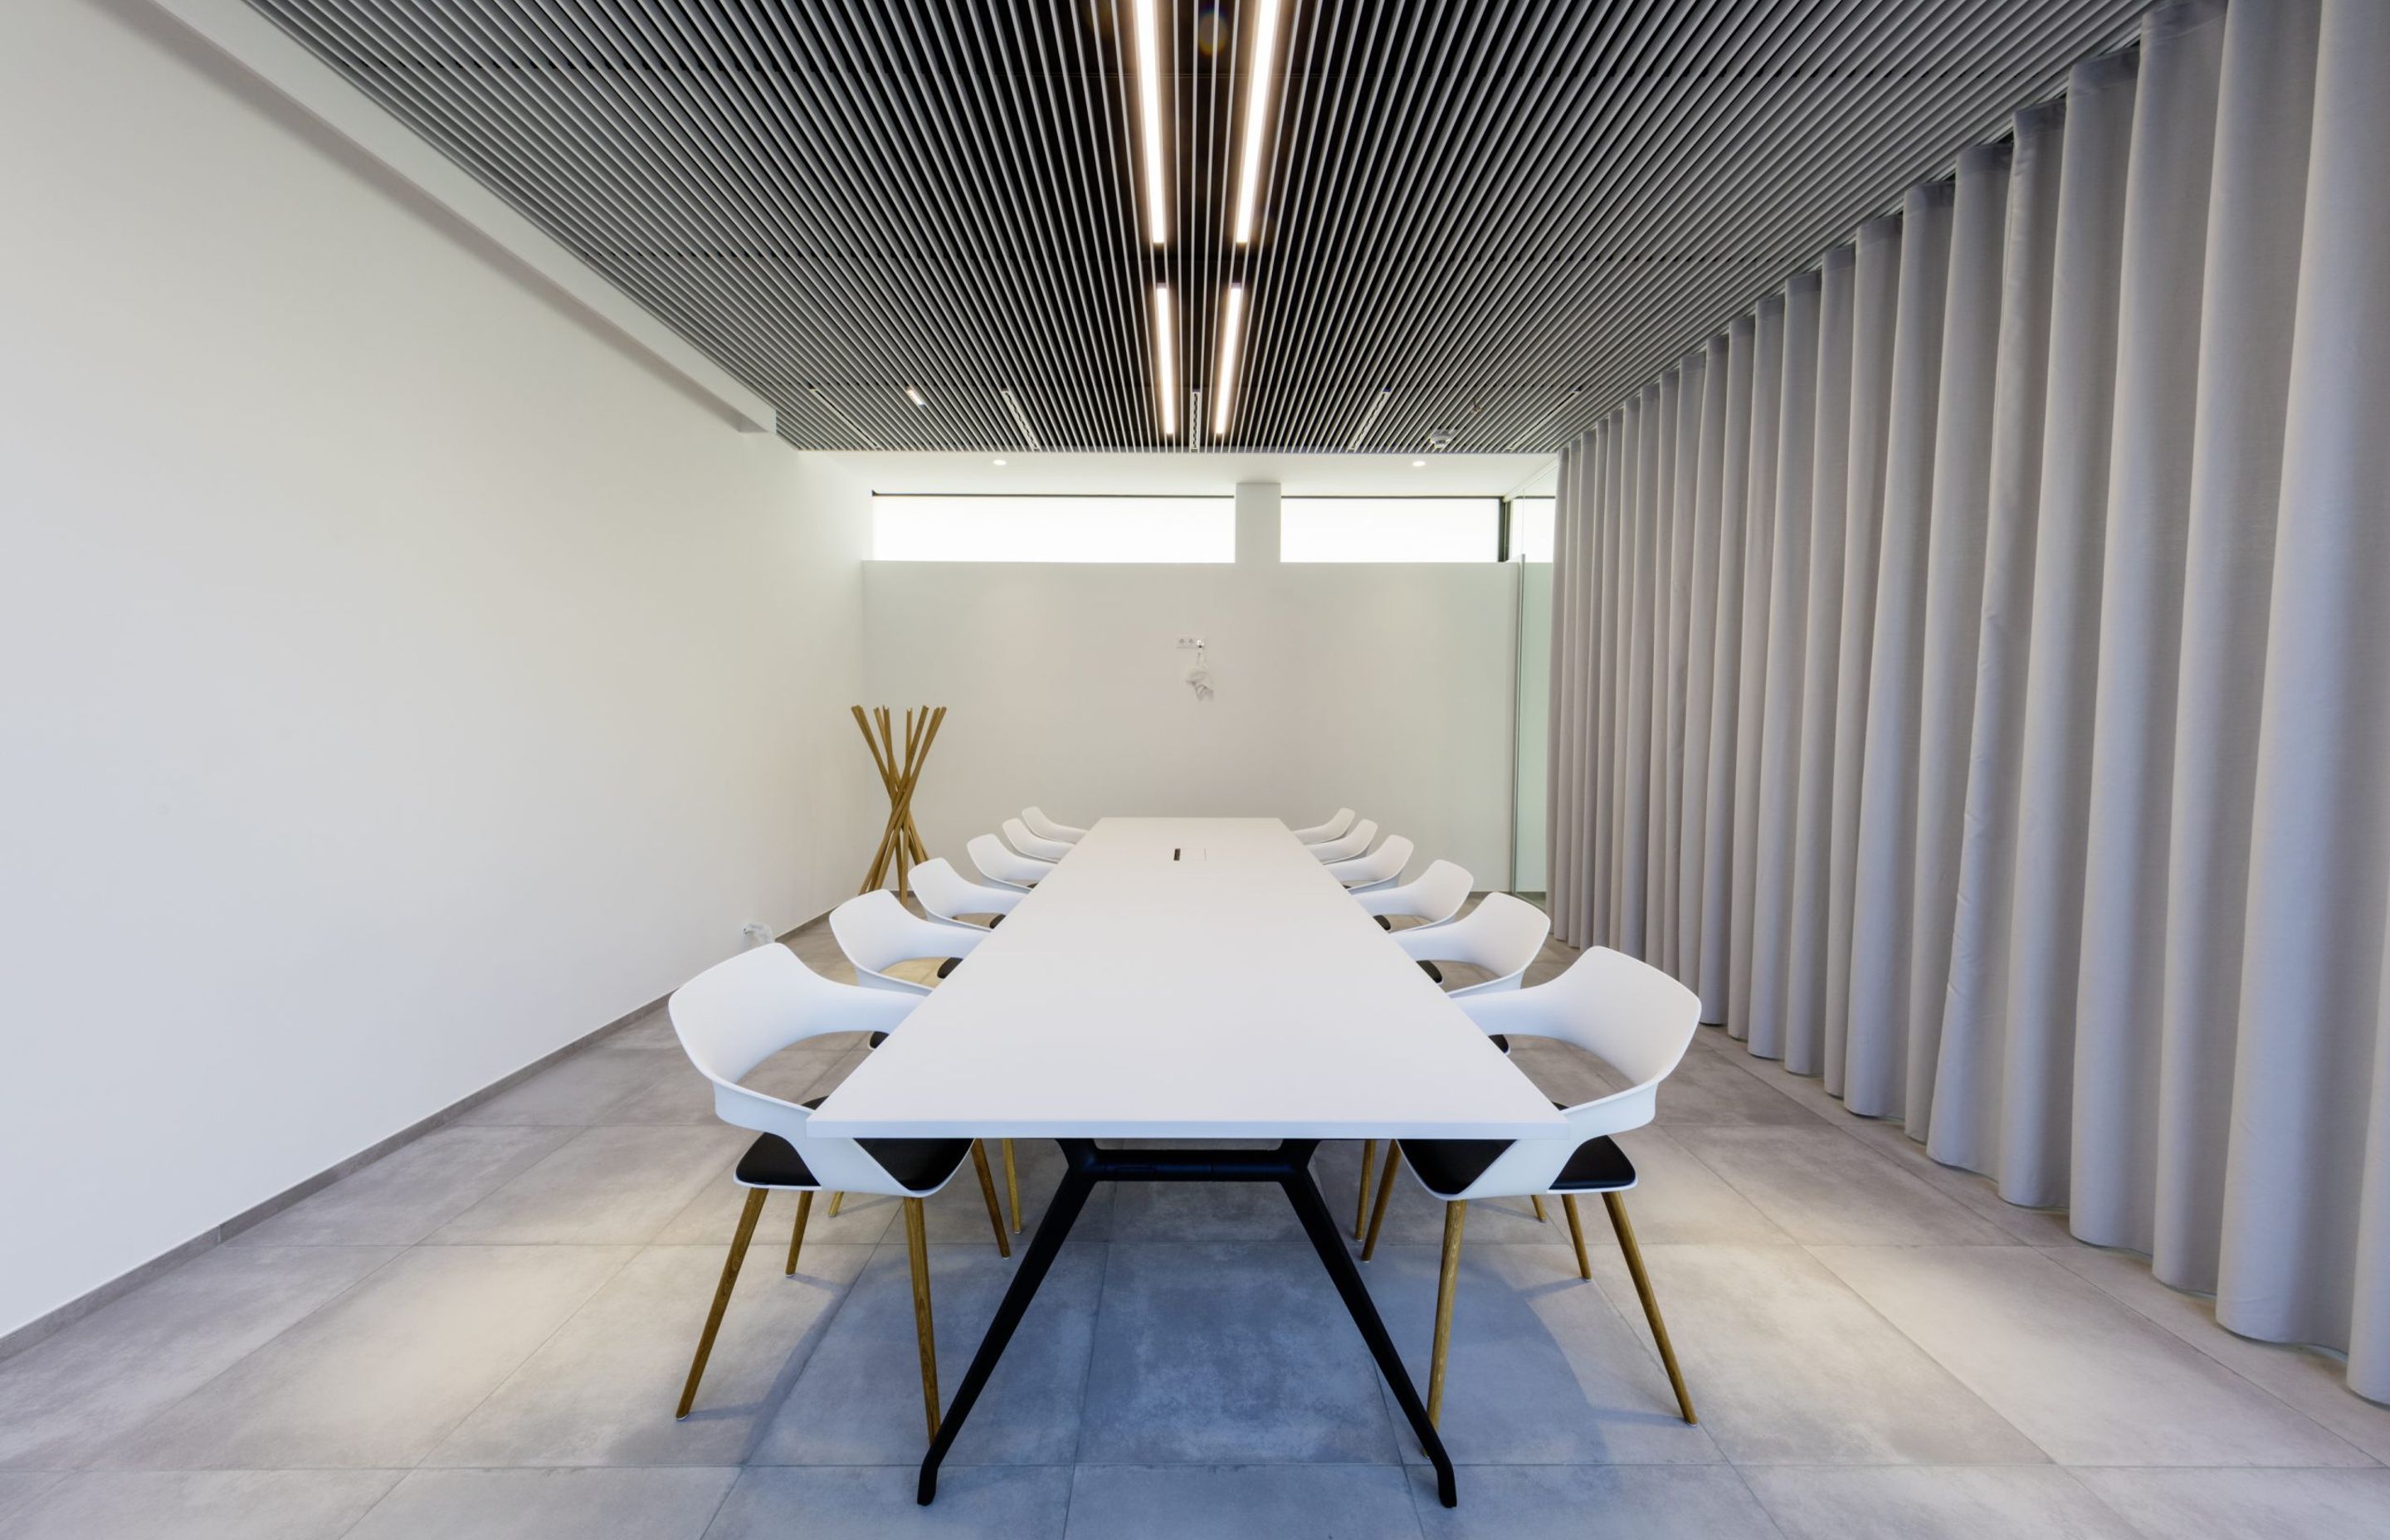 The large meeting room has an air of tranquility and focus about it. It was fitted with a clean, white Versa table configuration and versatile Occo chairs. Photo: die arge lola